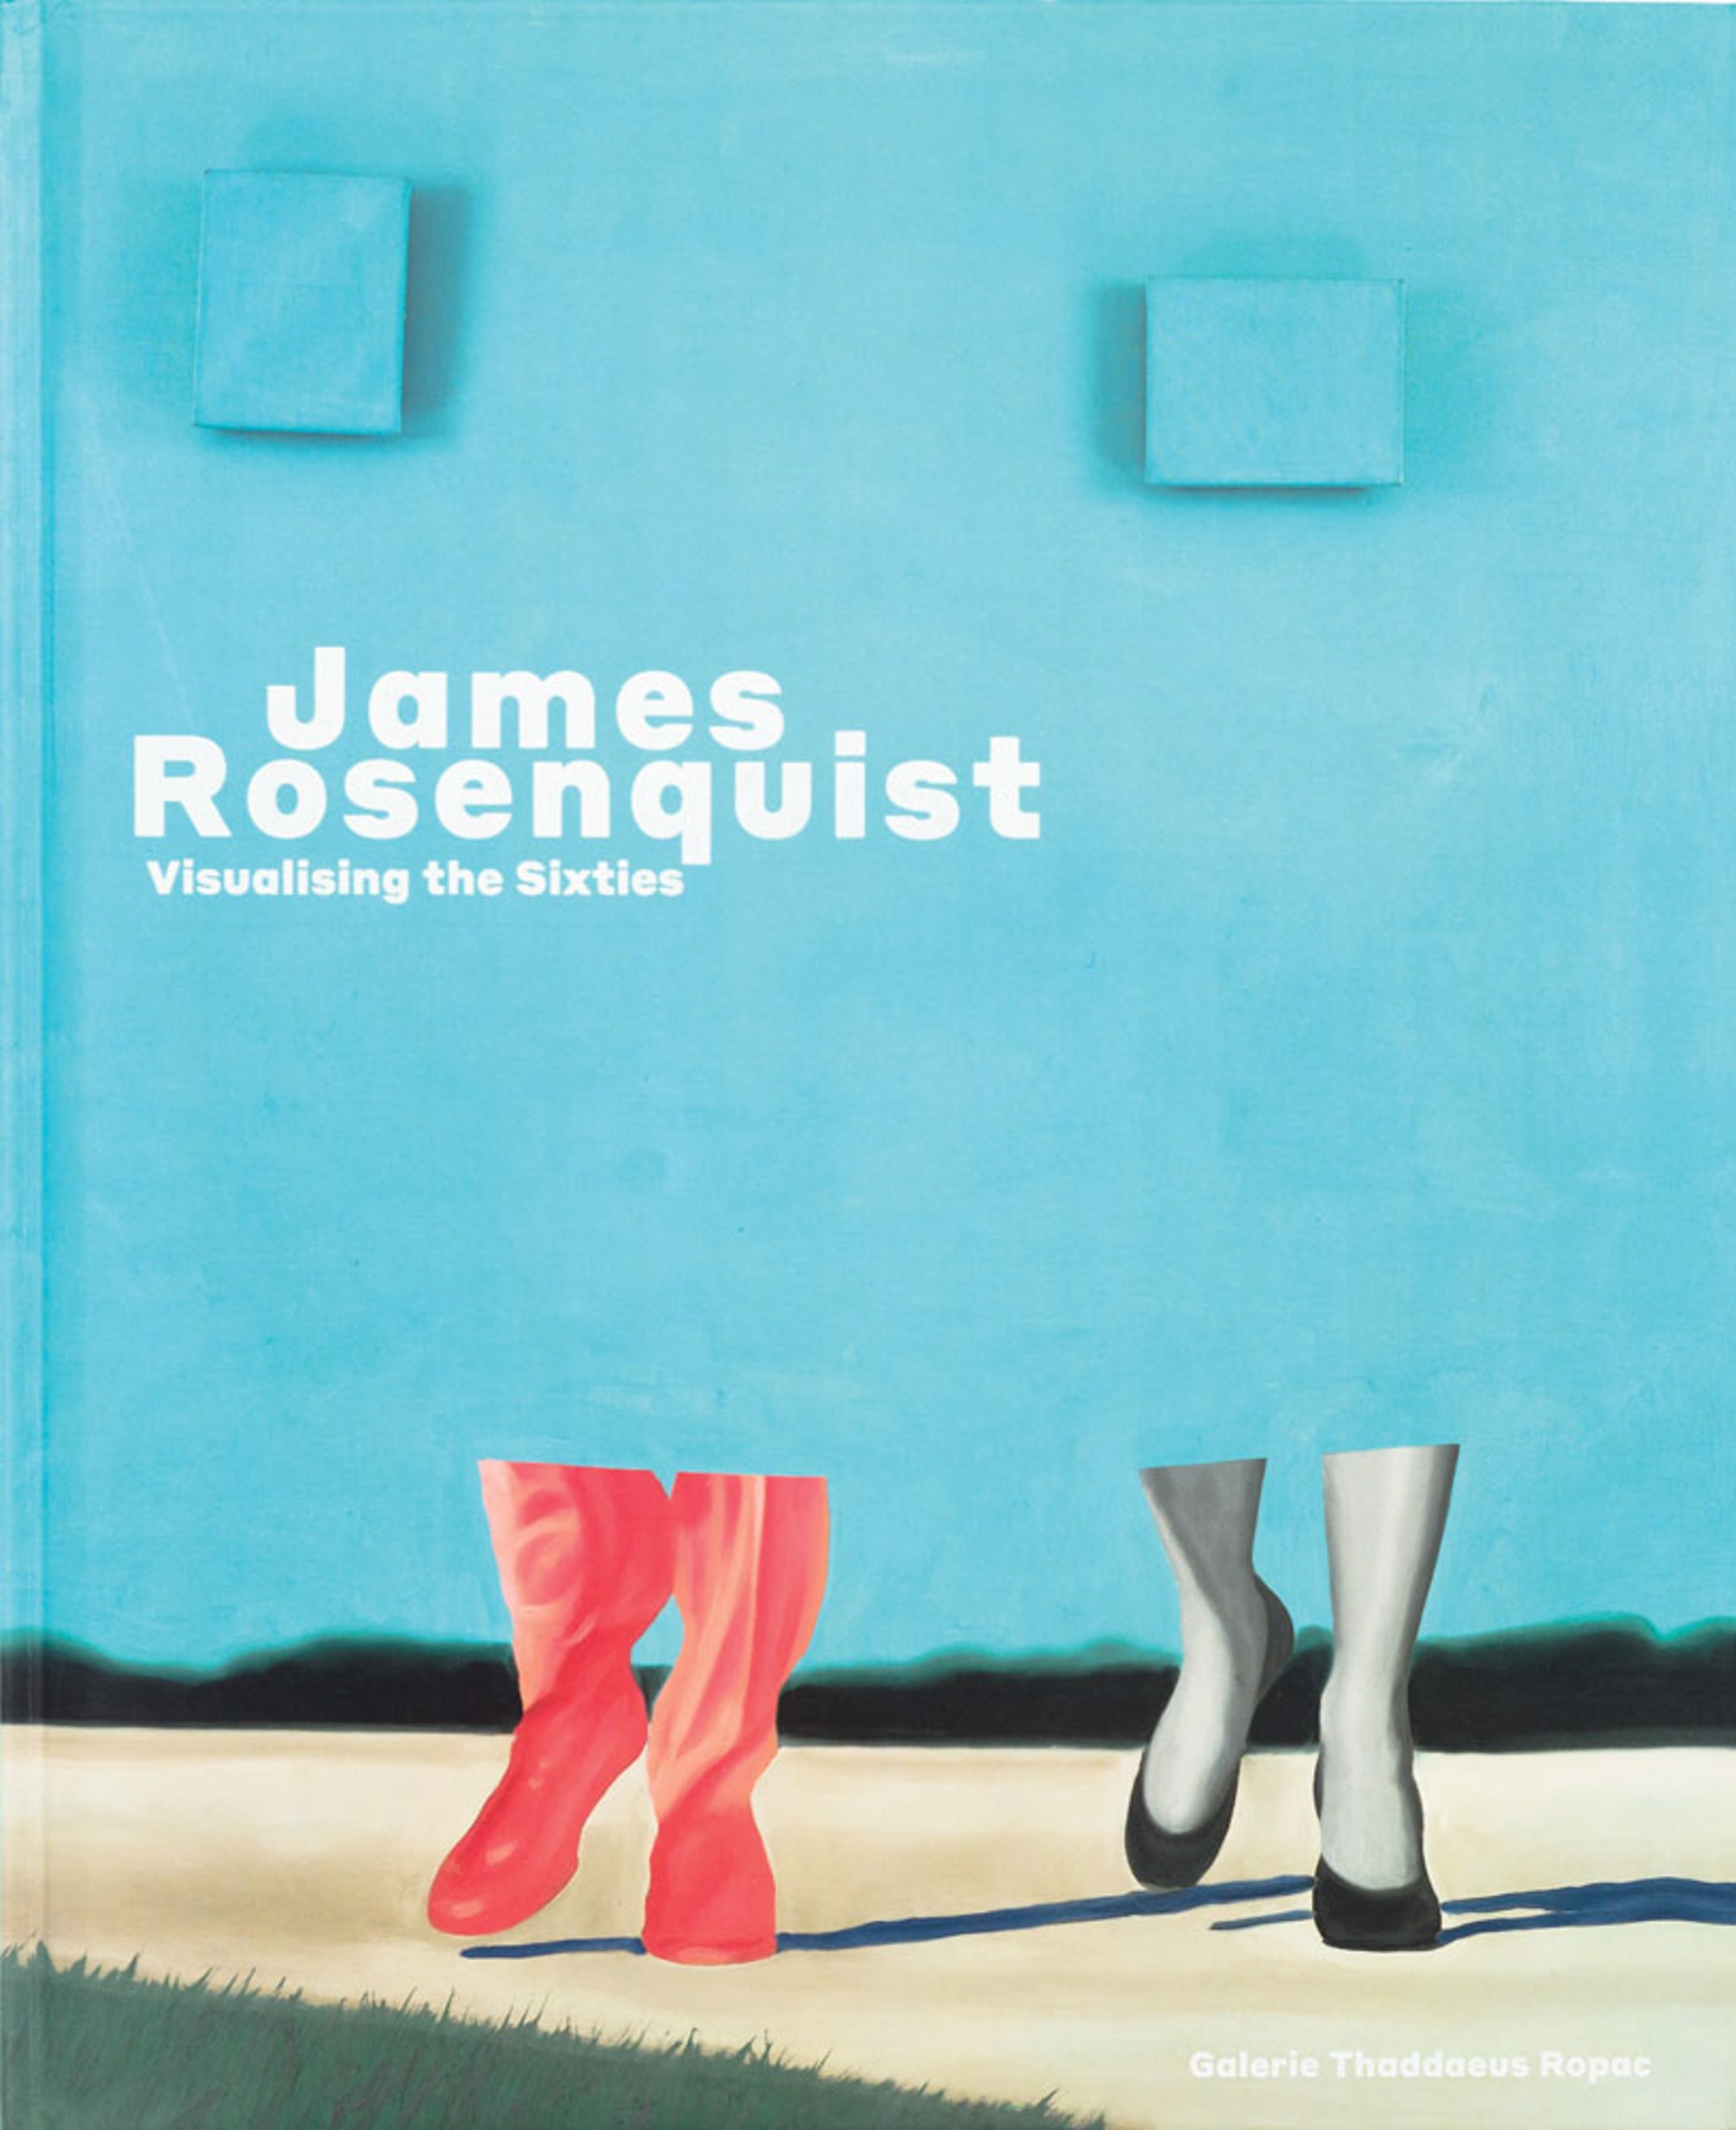 James Rosenquist: Visualising the Sixties by James Rosenquist